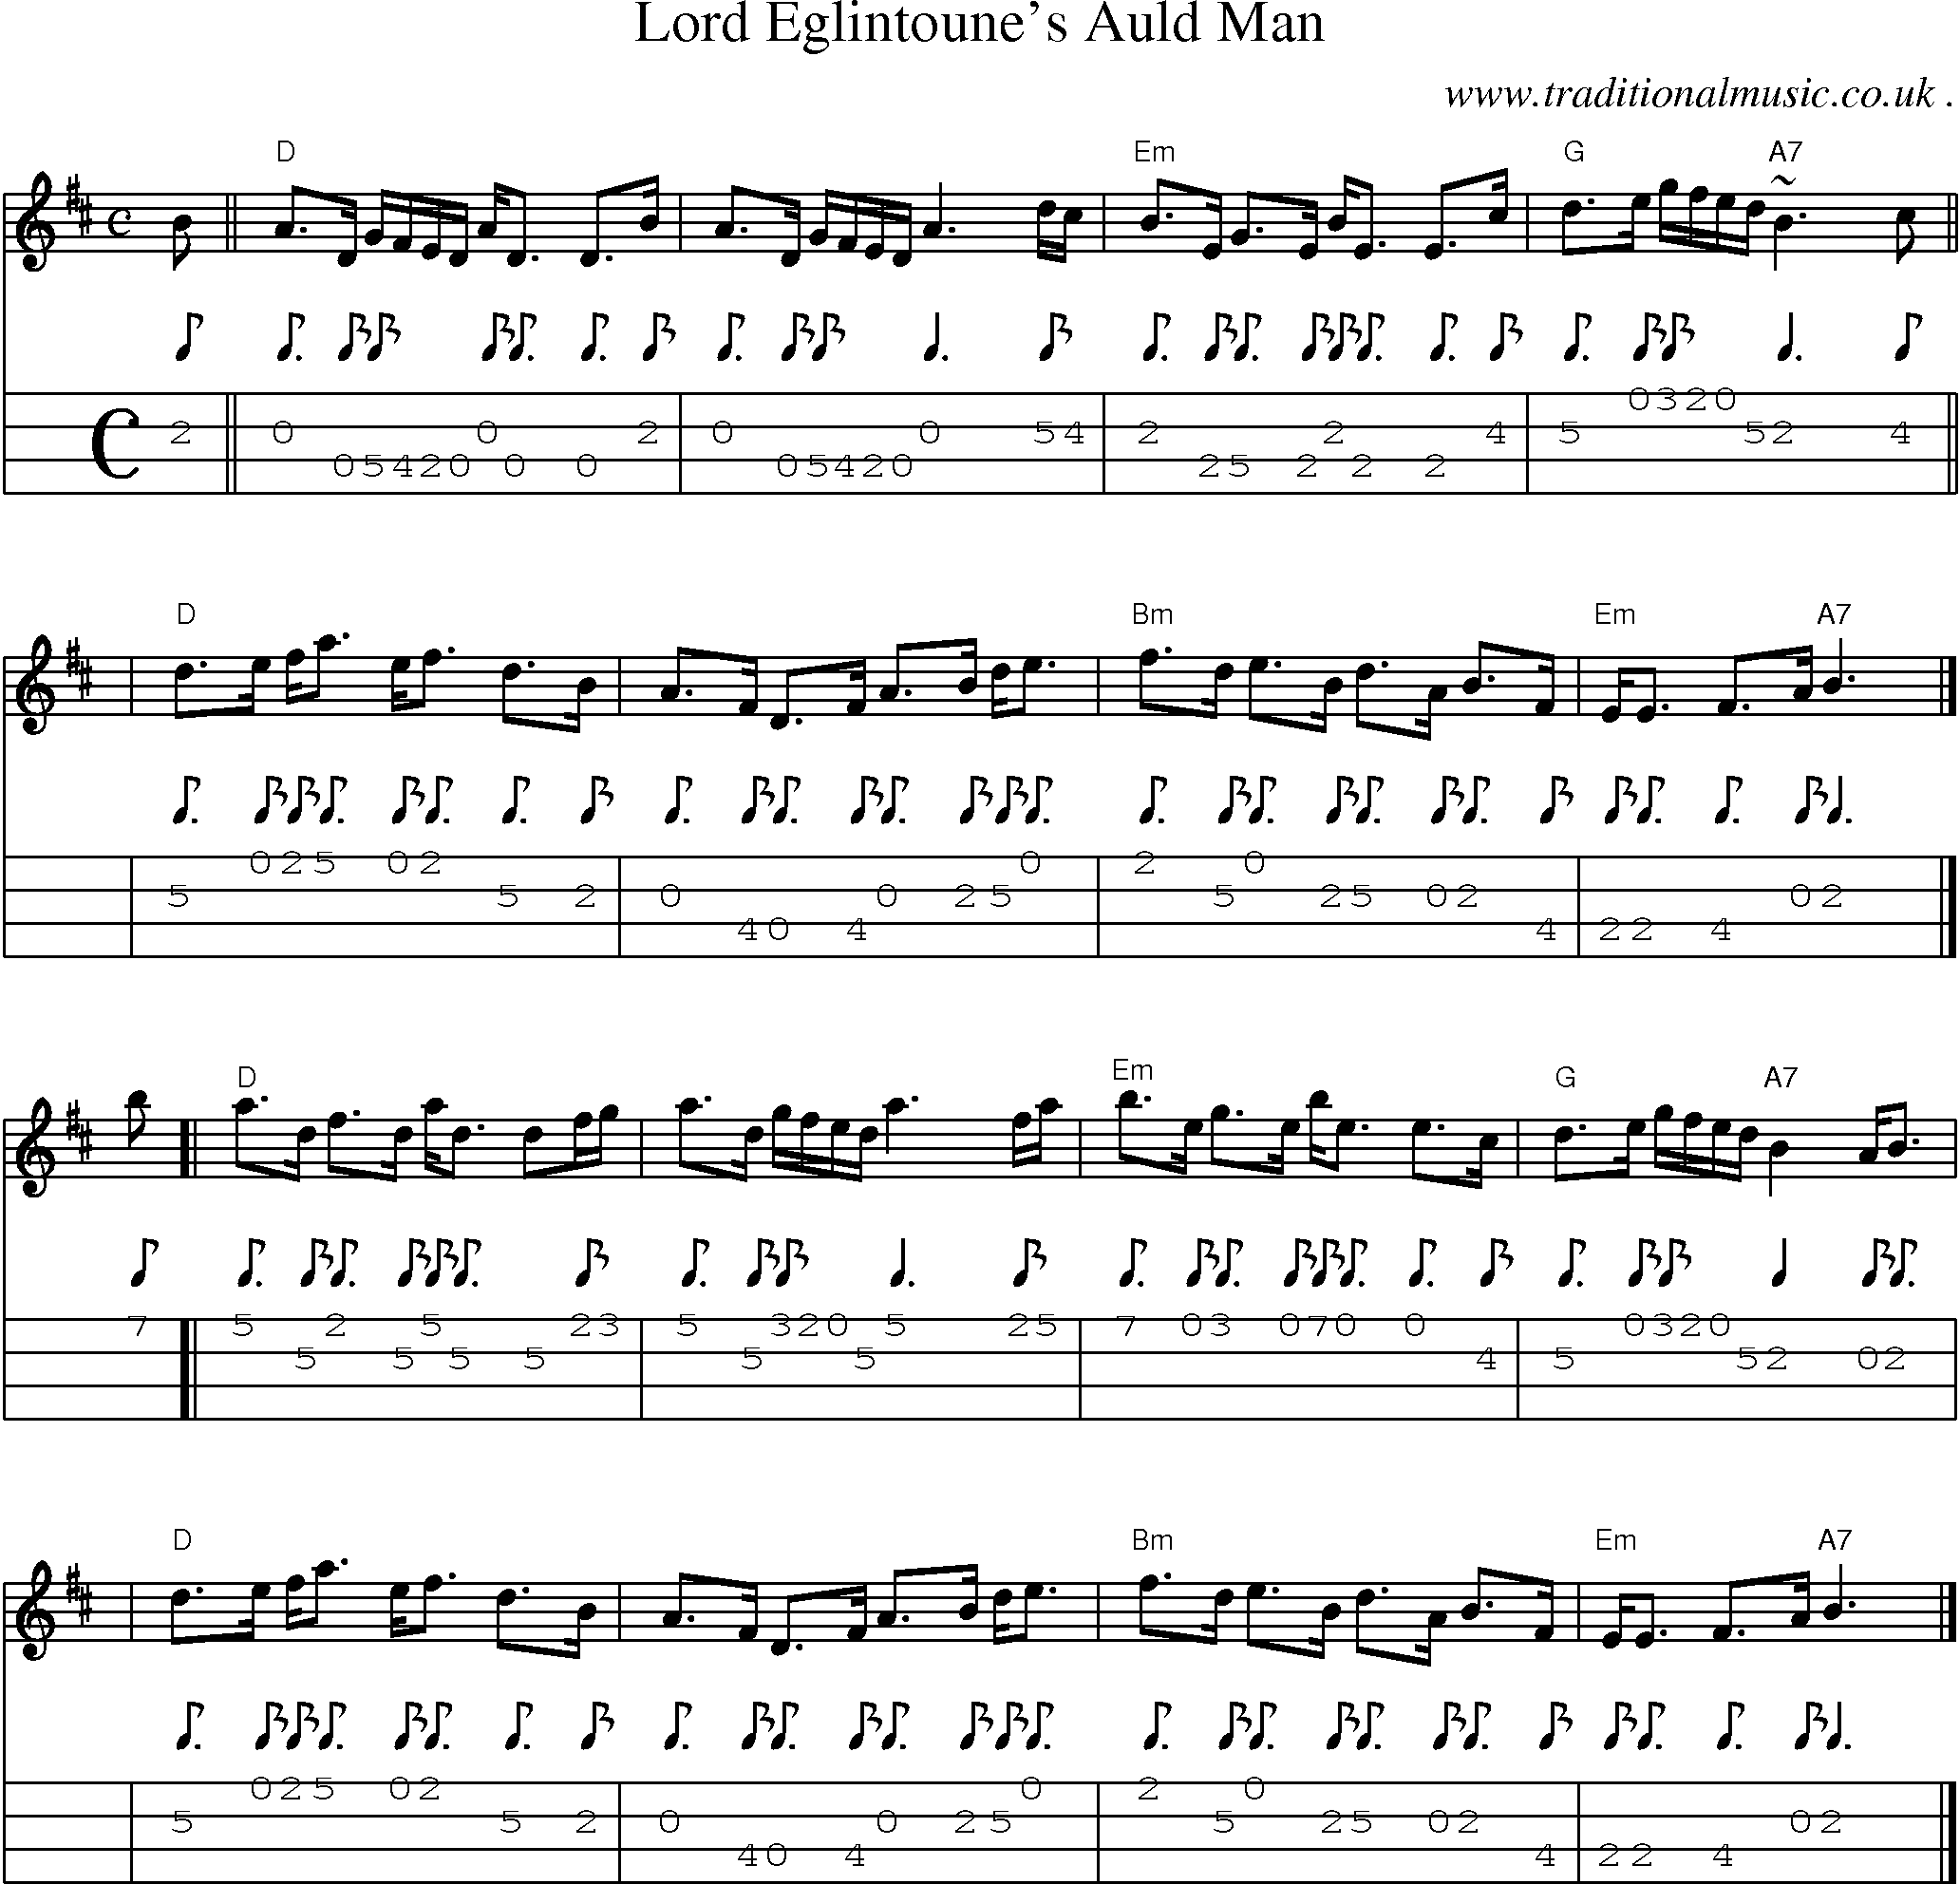 Sheet-music  score, Chords and Mandolin Tabs for Lord Eglintounes Auld Man